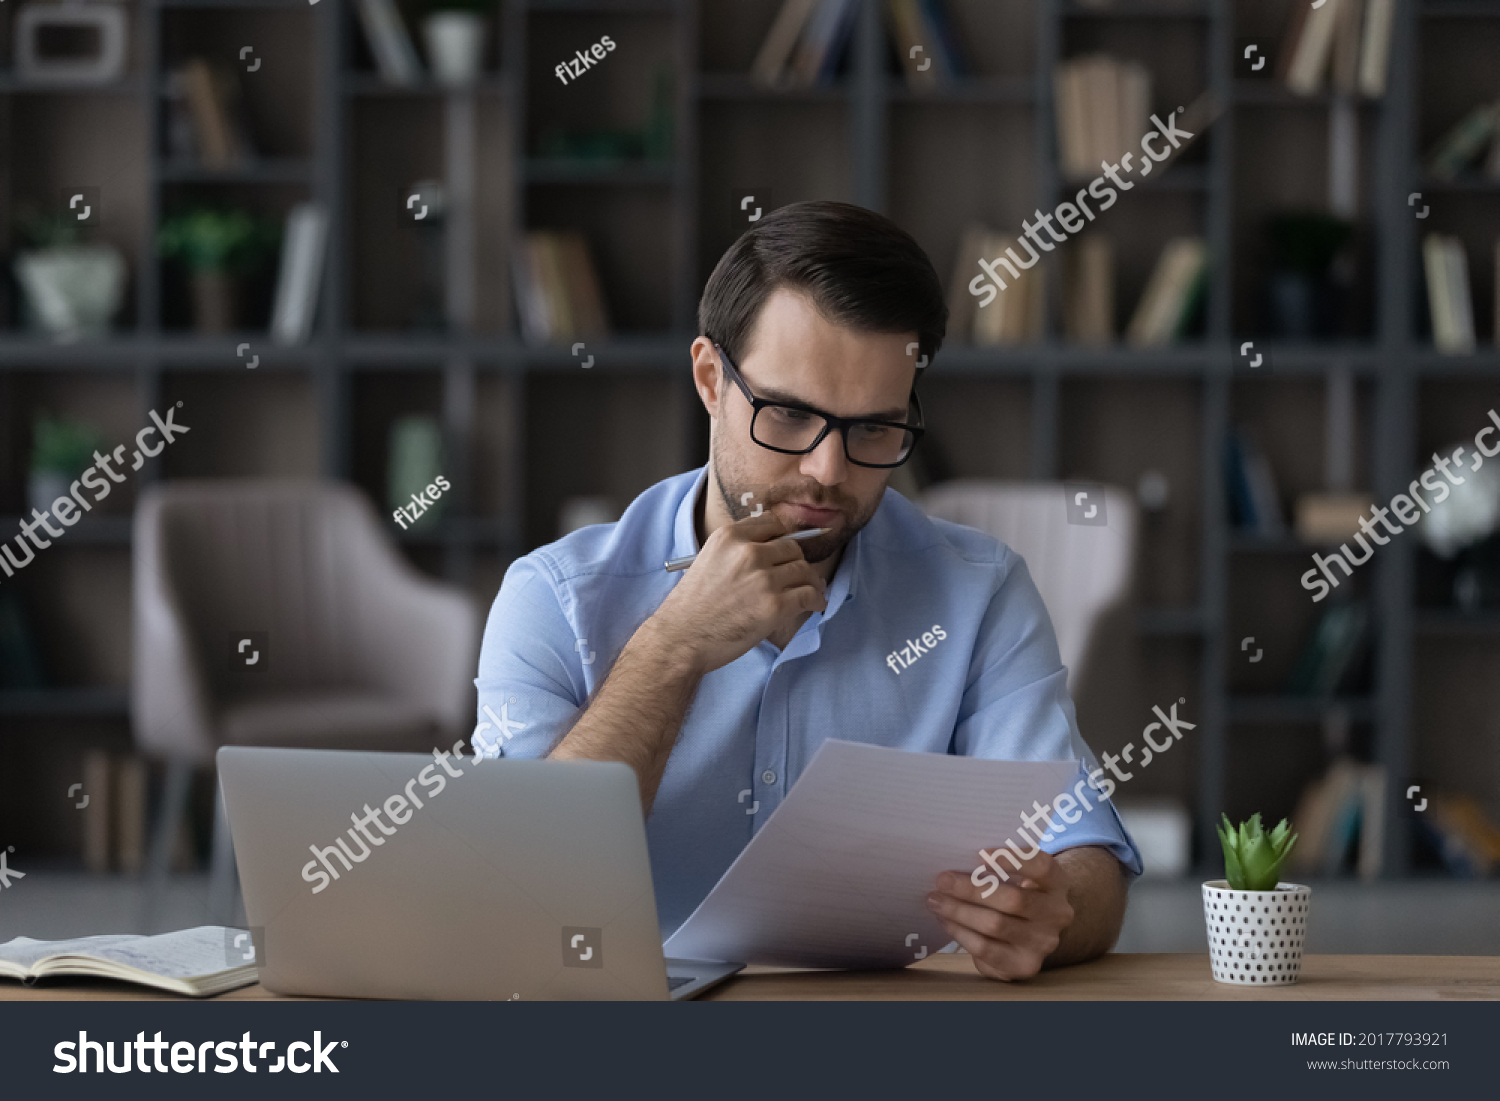 Working with papers. Serious millennial male entrepreneur work at home office alone hold read document hardcopy think on conditions terms. Focused young man engaged in paperwork edit text of agreement #2017793921